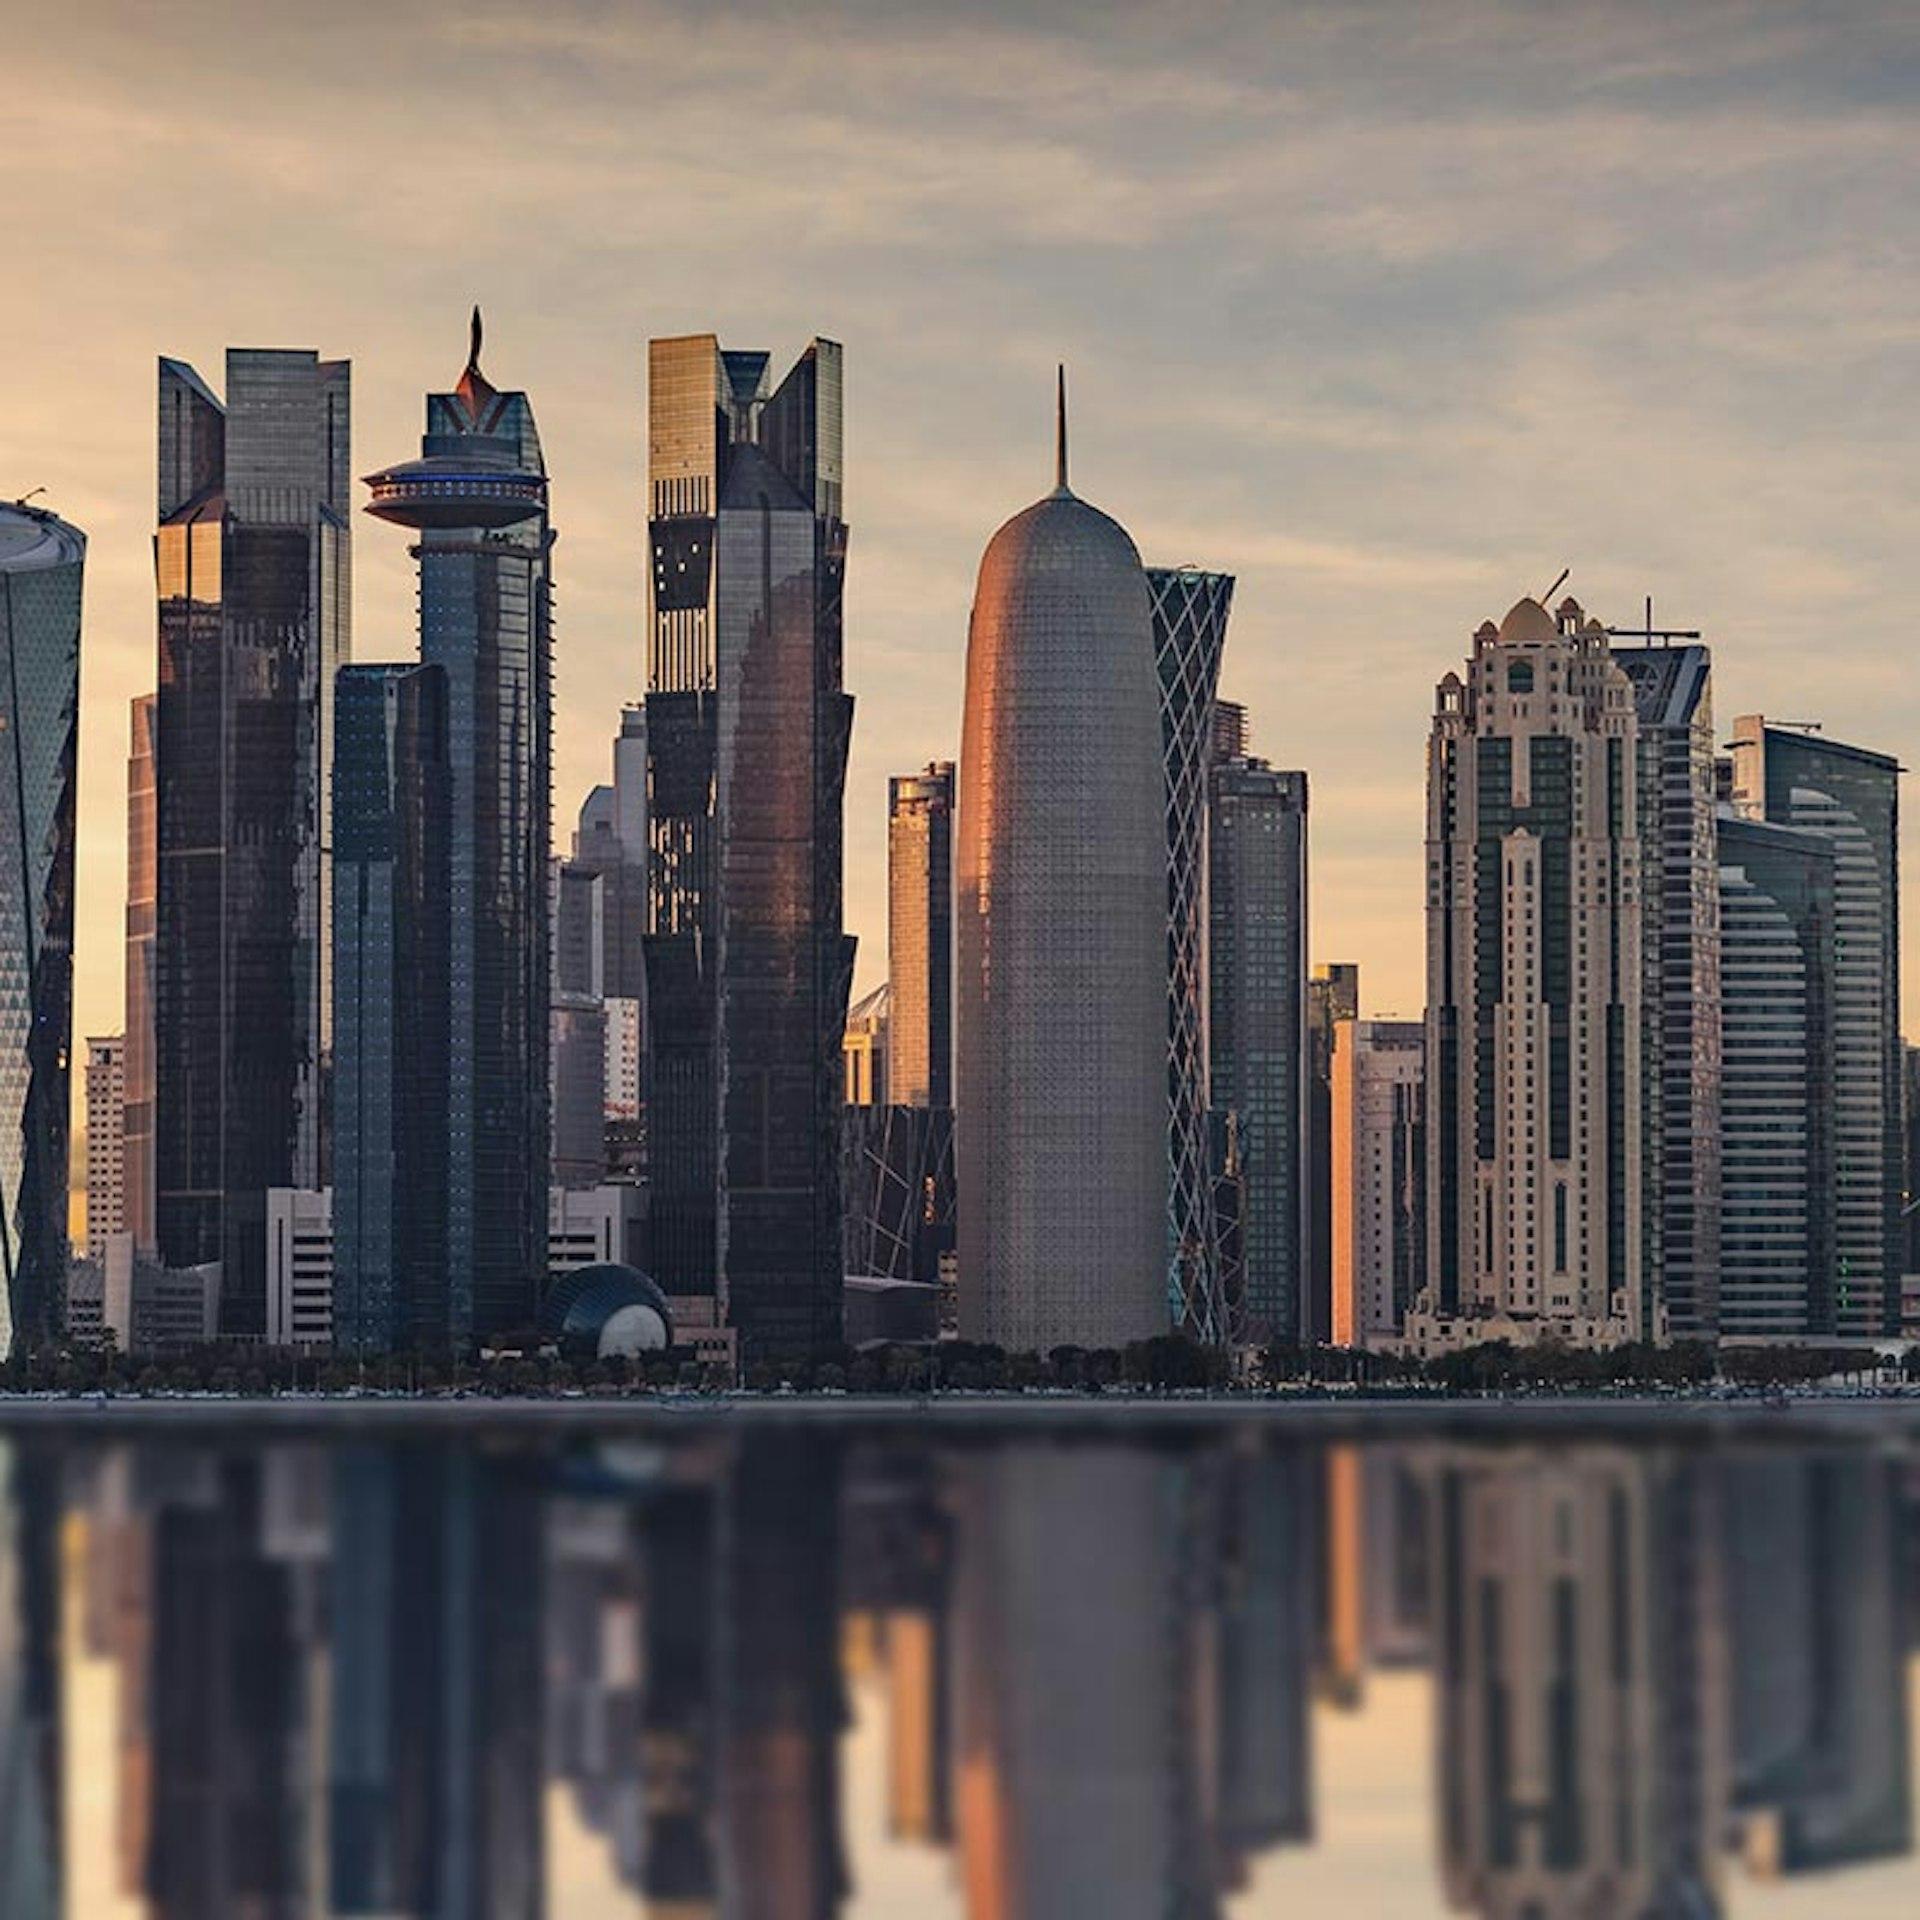 Get the latest news and updates on e-invoicing, e-ordering, e-archiving and indirect tax regulatory requirements for Qatar.